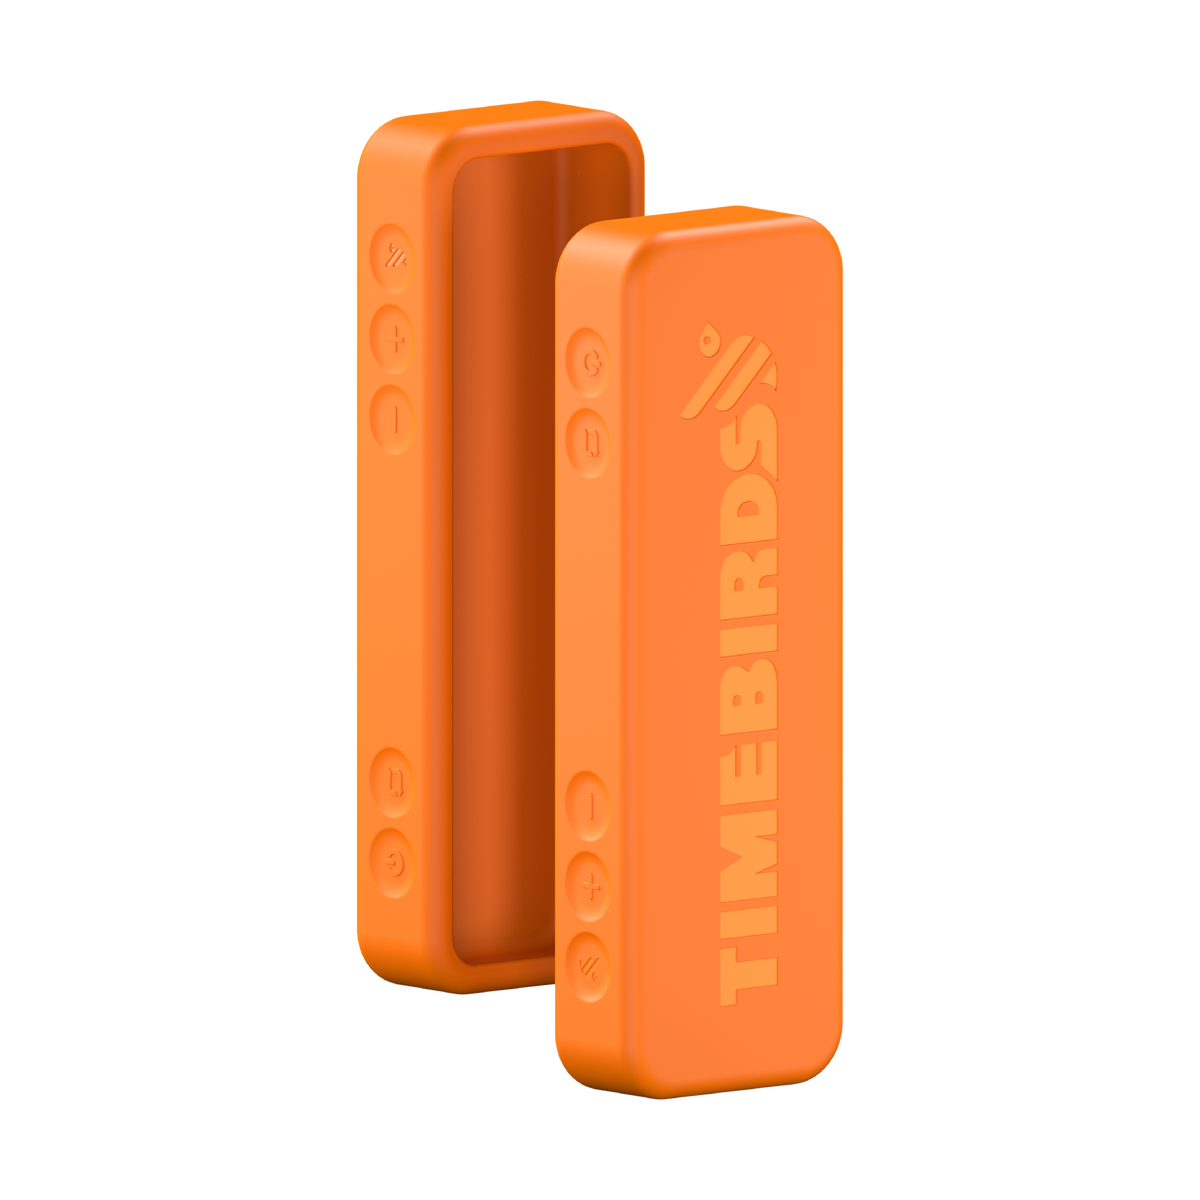 Timebirds™ Protective Case - All out Orange